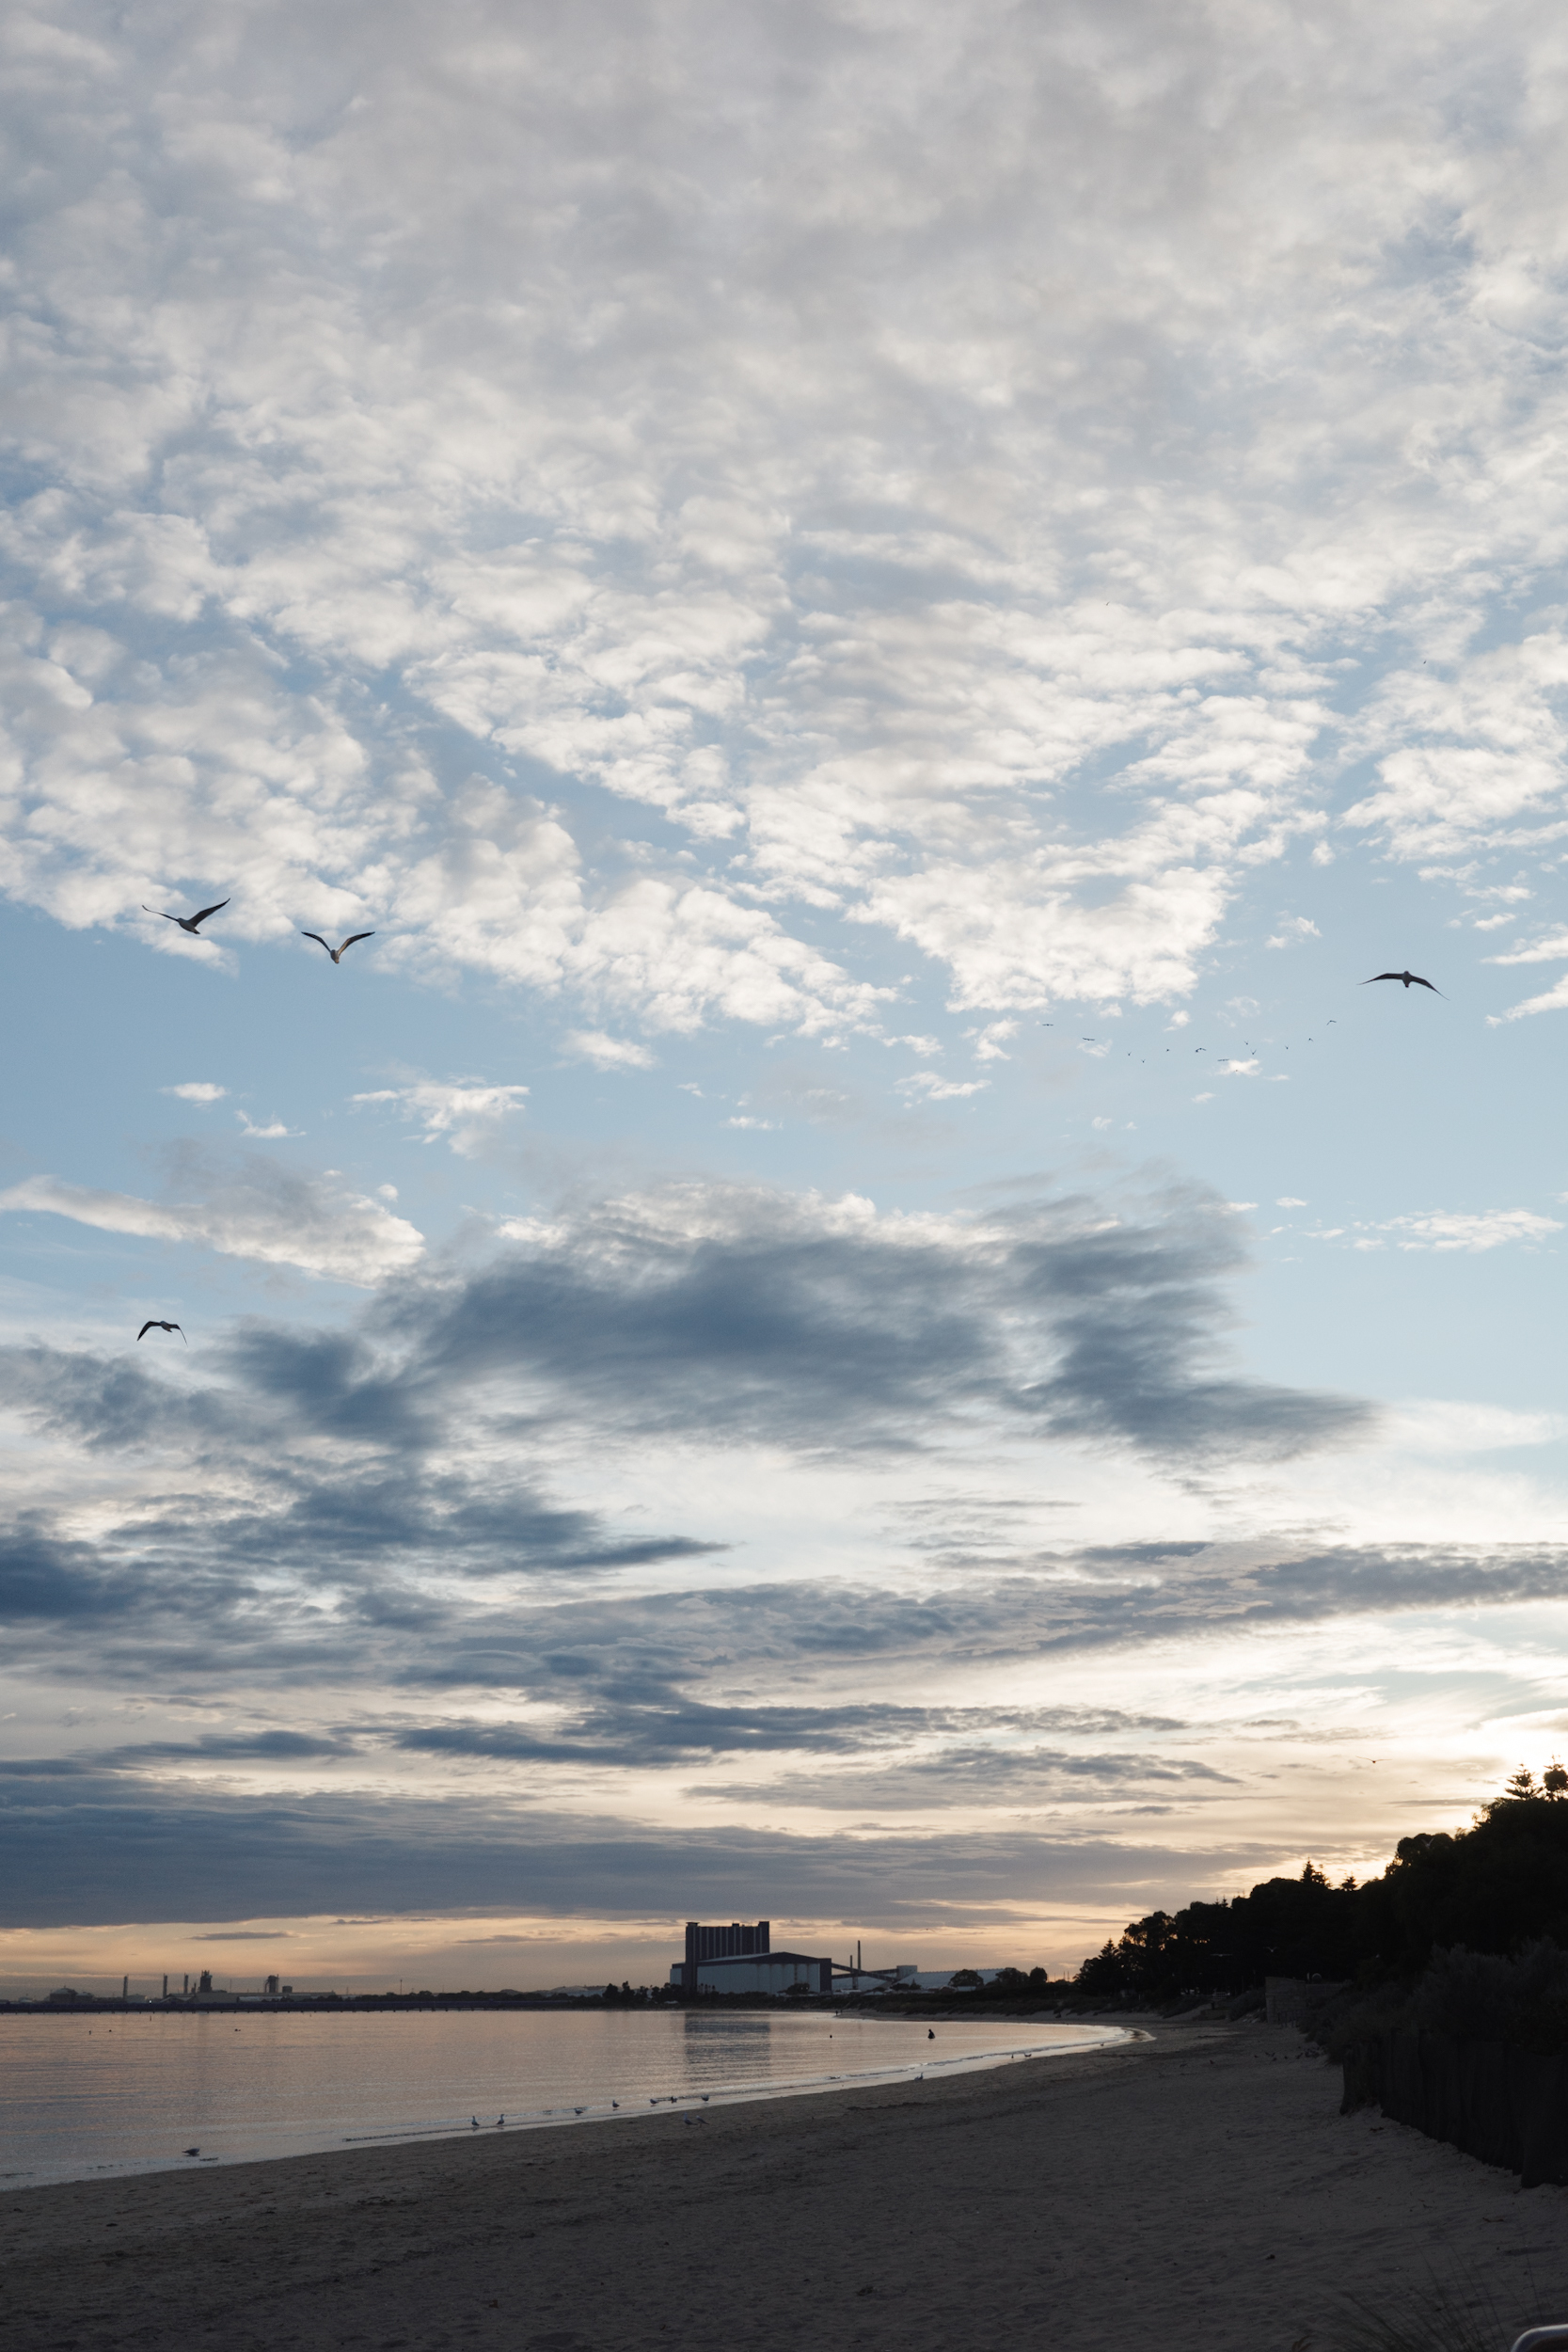 Auto-generated description: A serene beach scene with a vast sky filled with clouds, birds flying overhead, and an industrial structure in the distance.